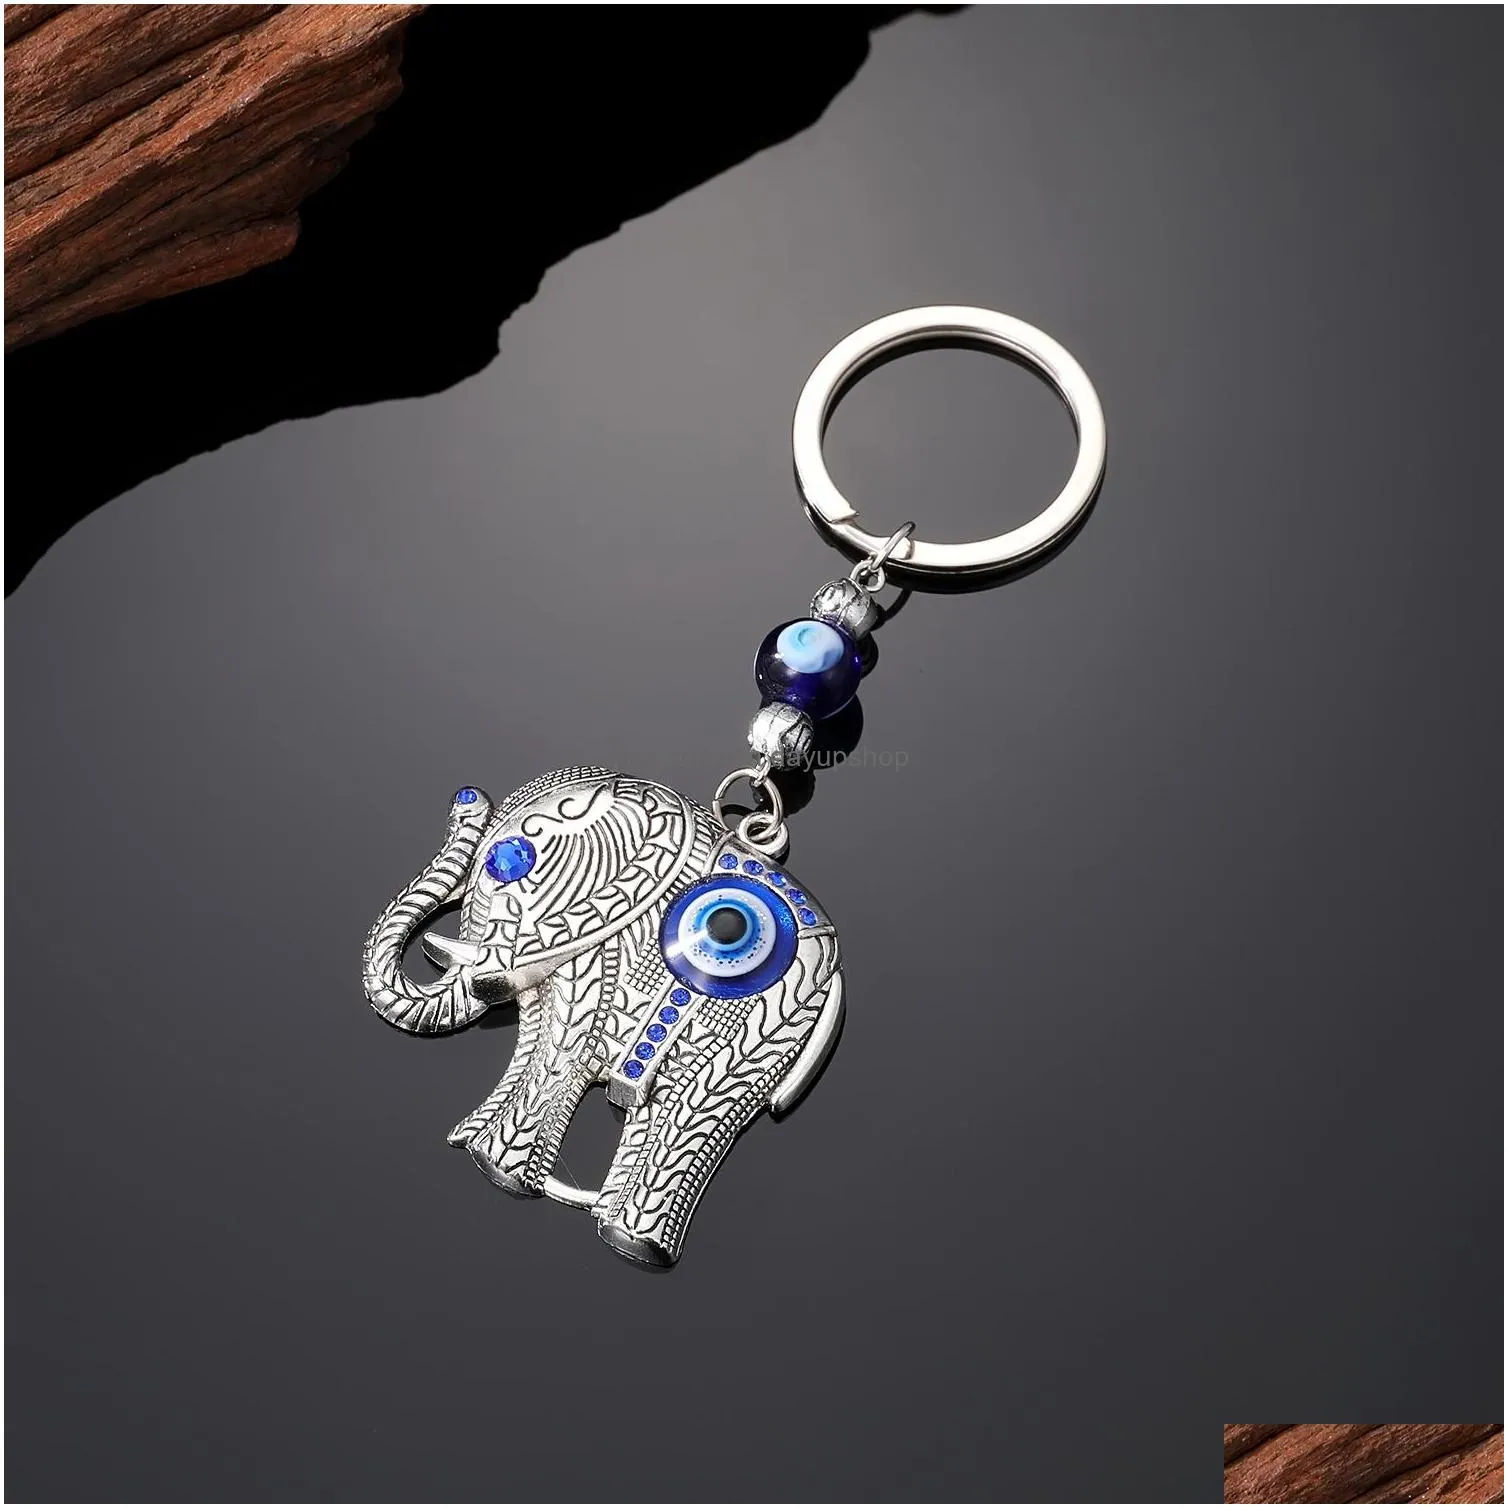 classic design antique silver blue evil eye key chain animal pendant crafting keychain hanging ornament jewelry for gift